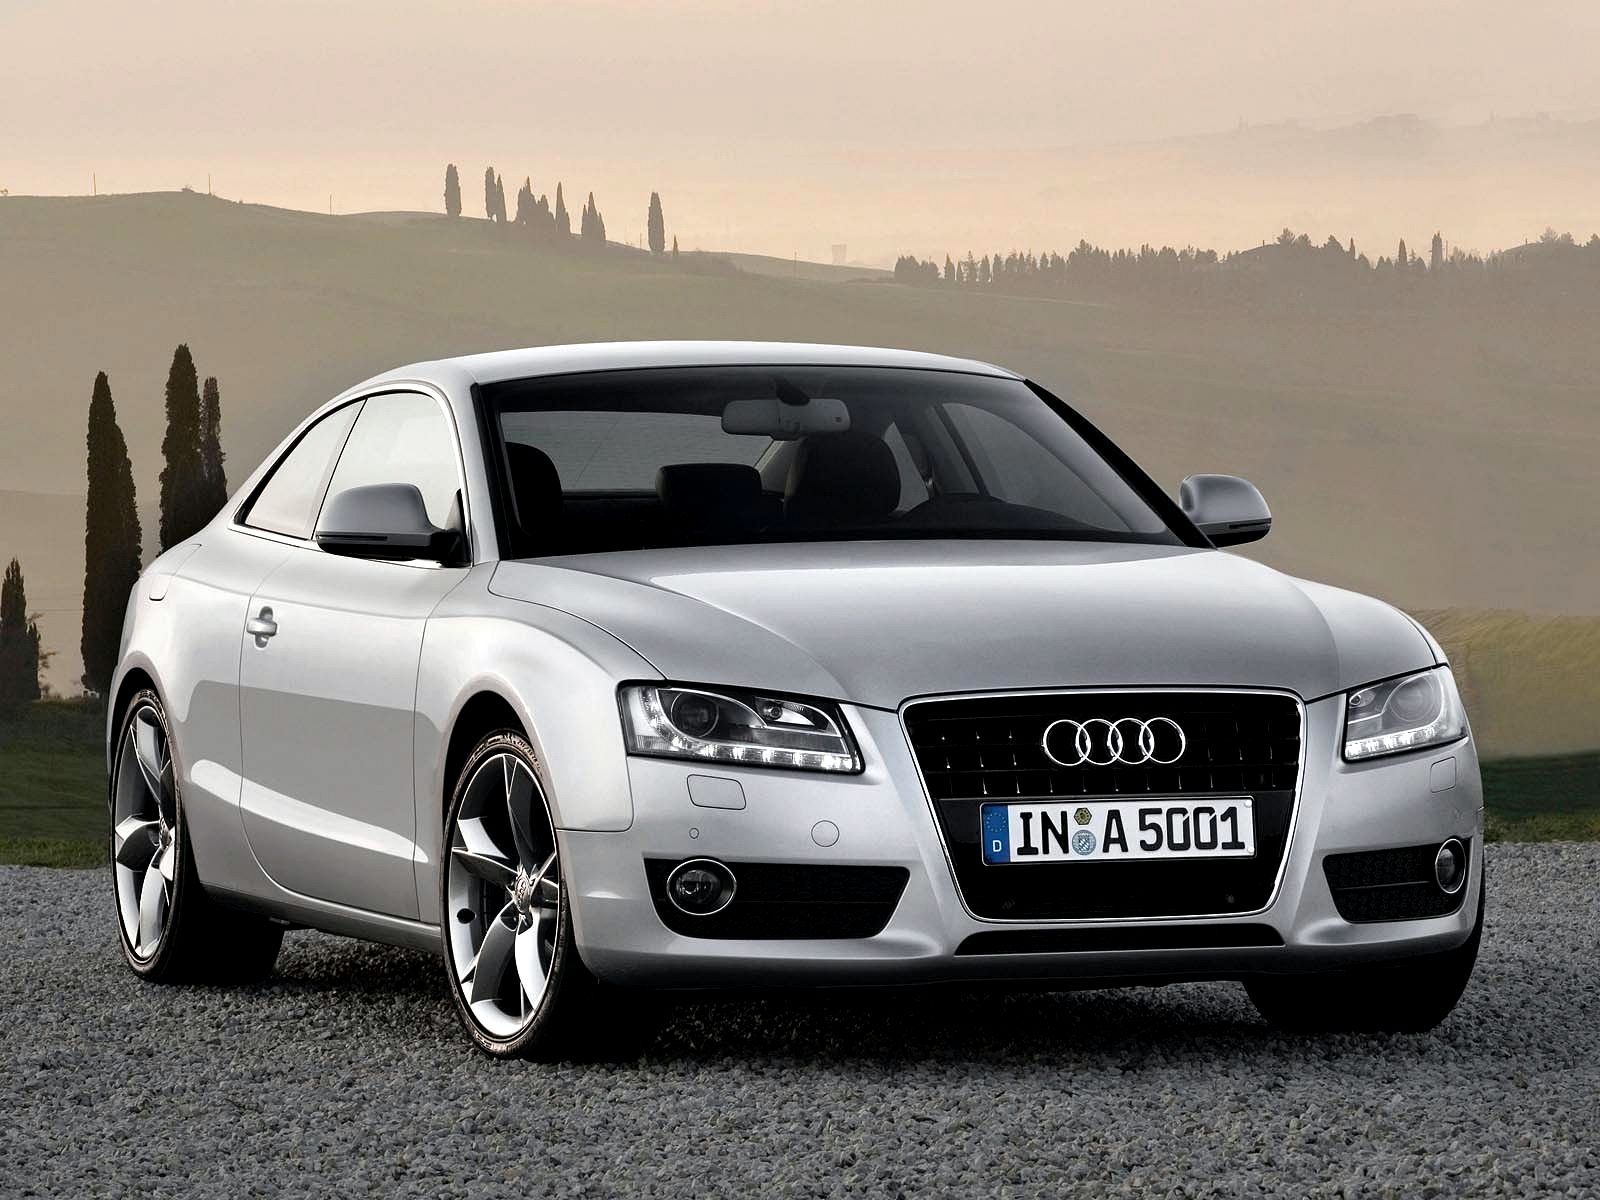 190 Audi Wallpapers For Your Pc, Mobile Phone, Ipad, - Audi A5 Coupe , HD Wallpaper & Backgrounds